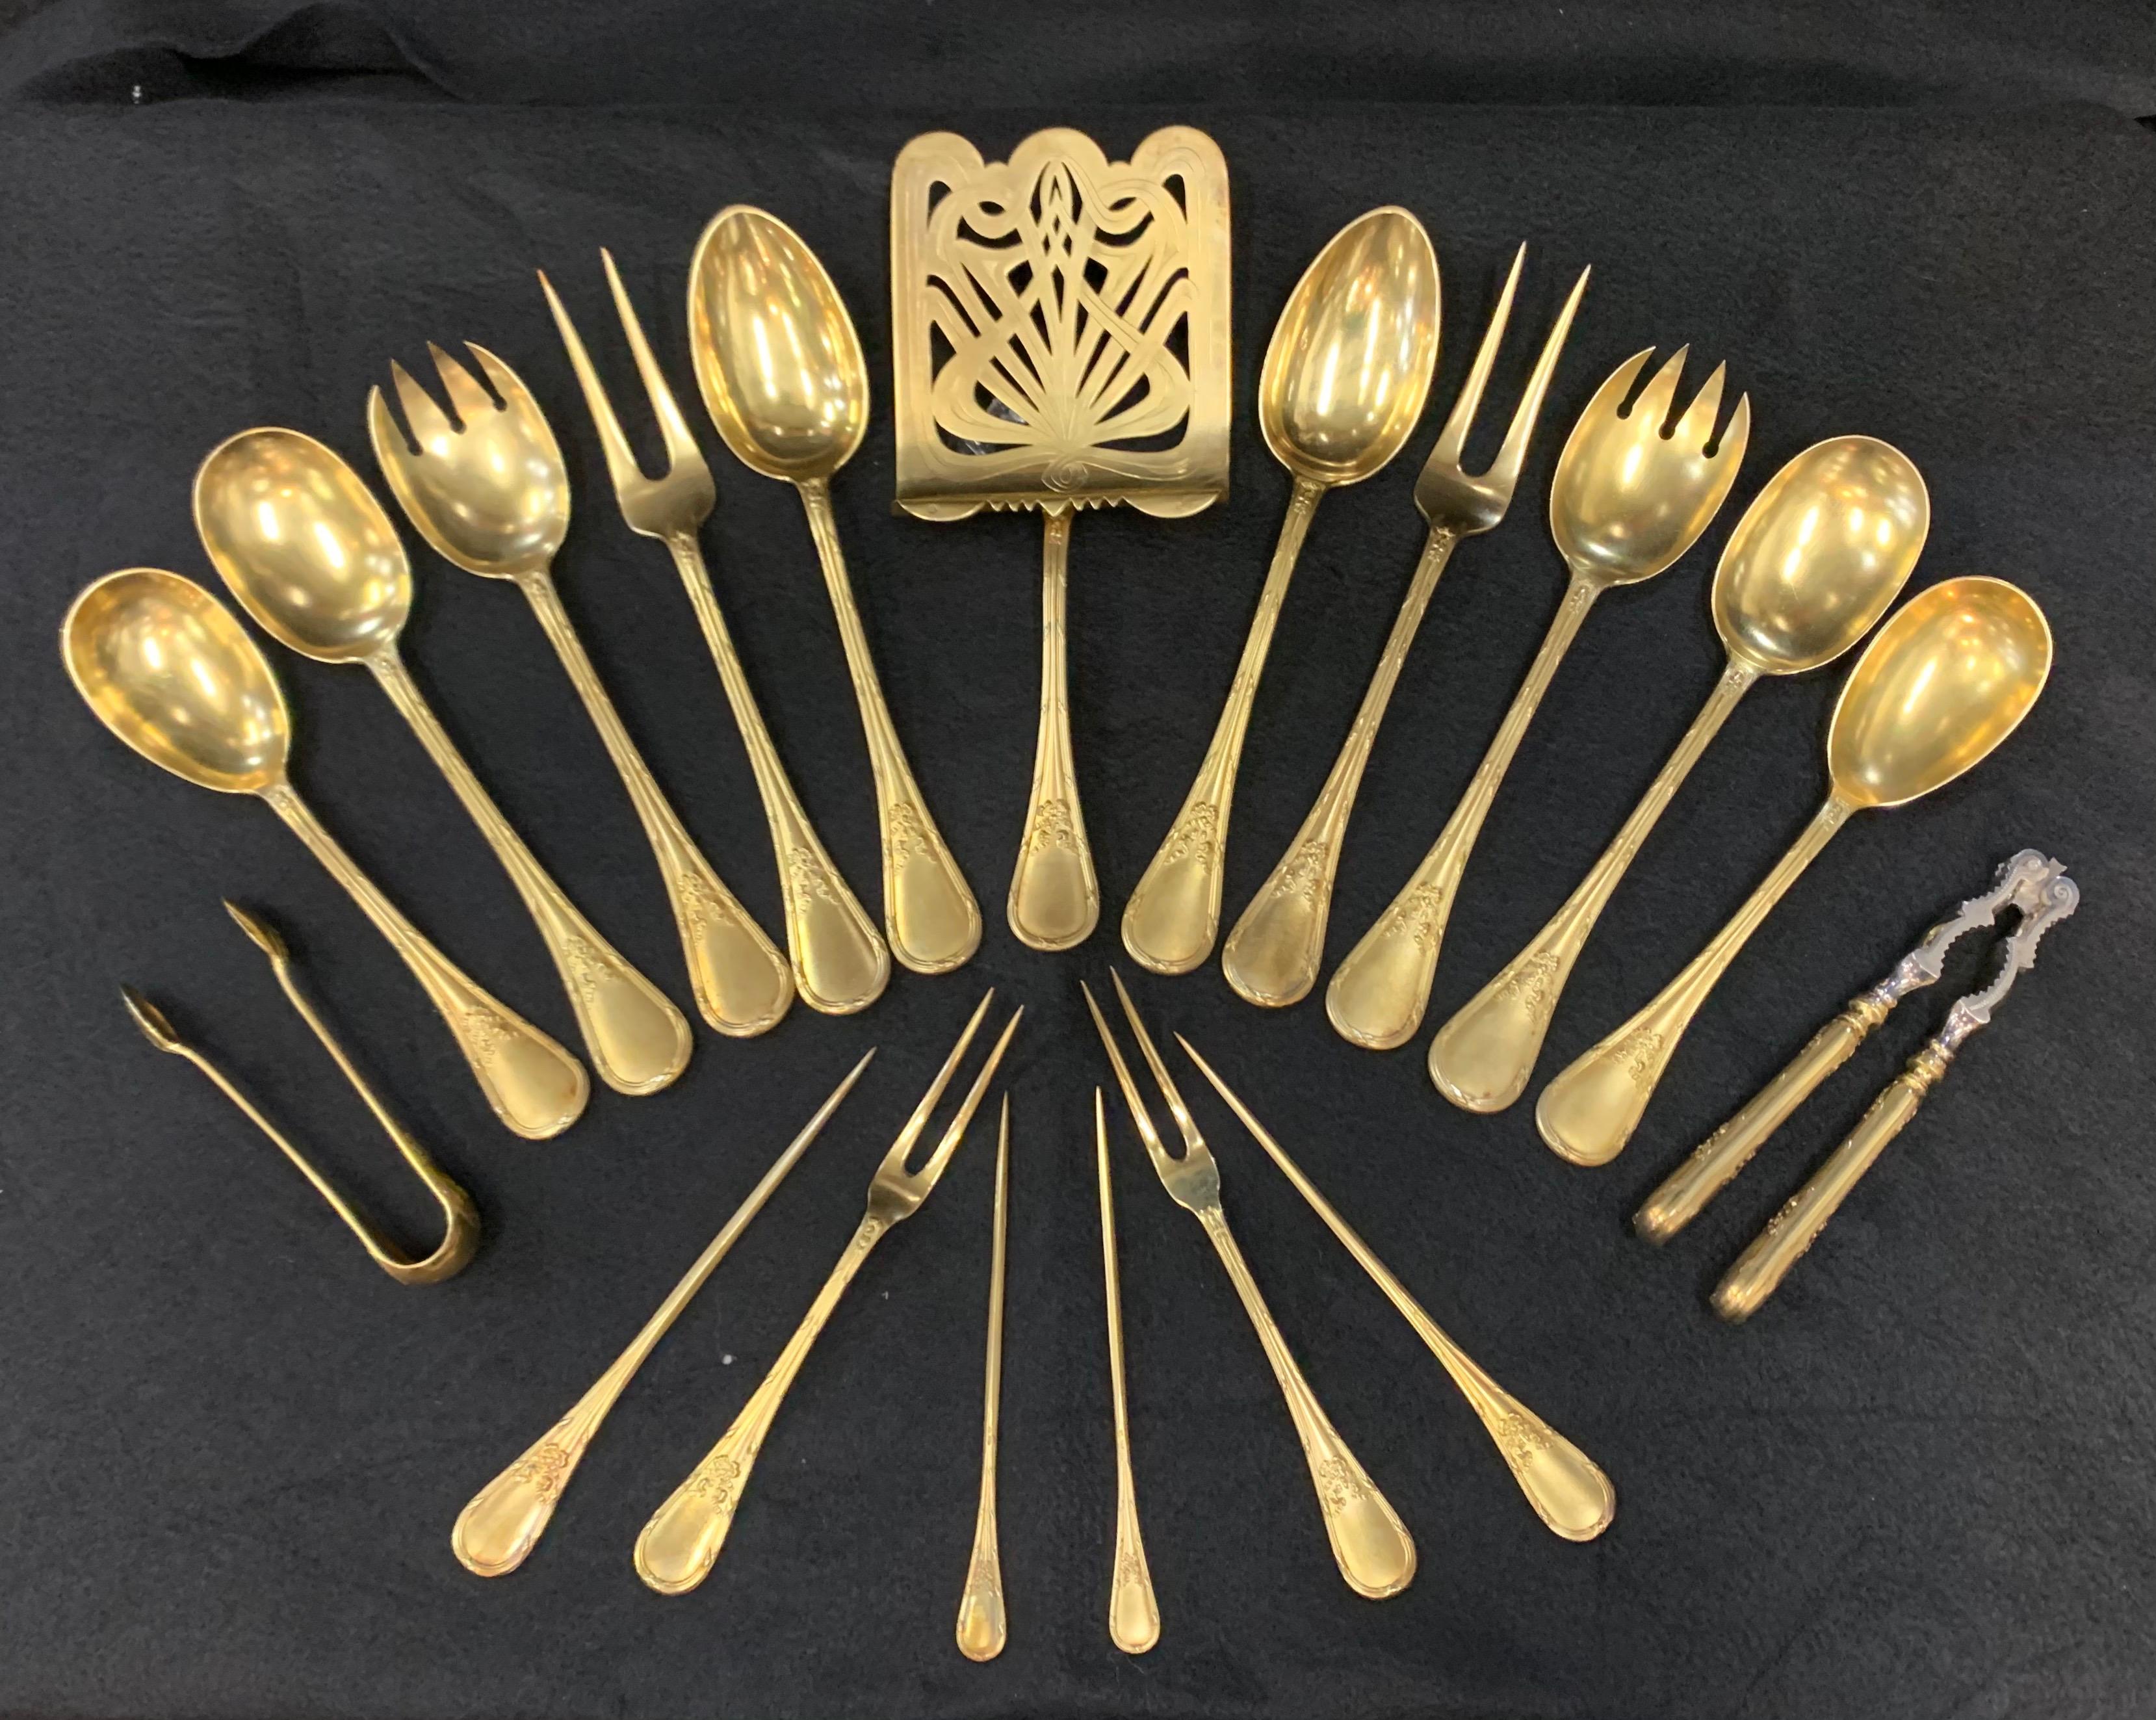 Regal Vienna Vermeil Flatware Silver Service for eighteen guests consisting of 312 pieces of flatware. There are 15 pieces of Vermeil Utensils per place setting for eighteen Dinner Guests with 42 formal serving pieces. The Vermeil has late 19th